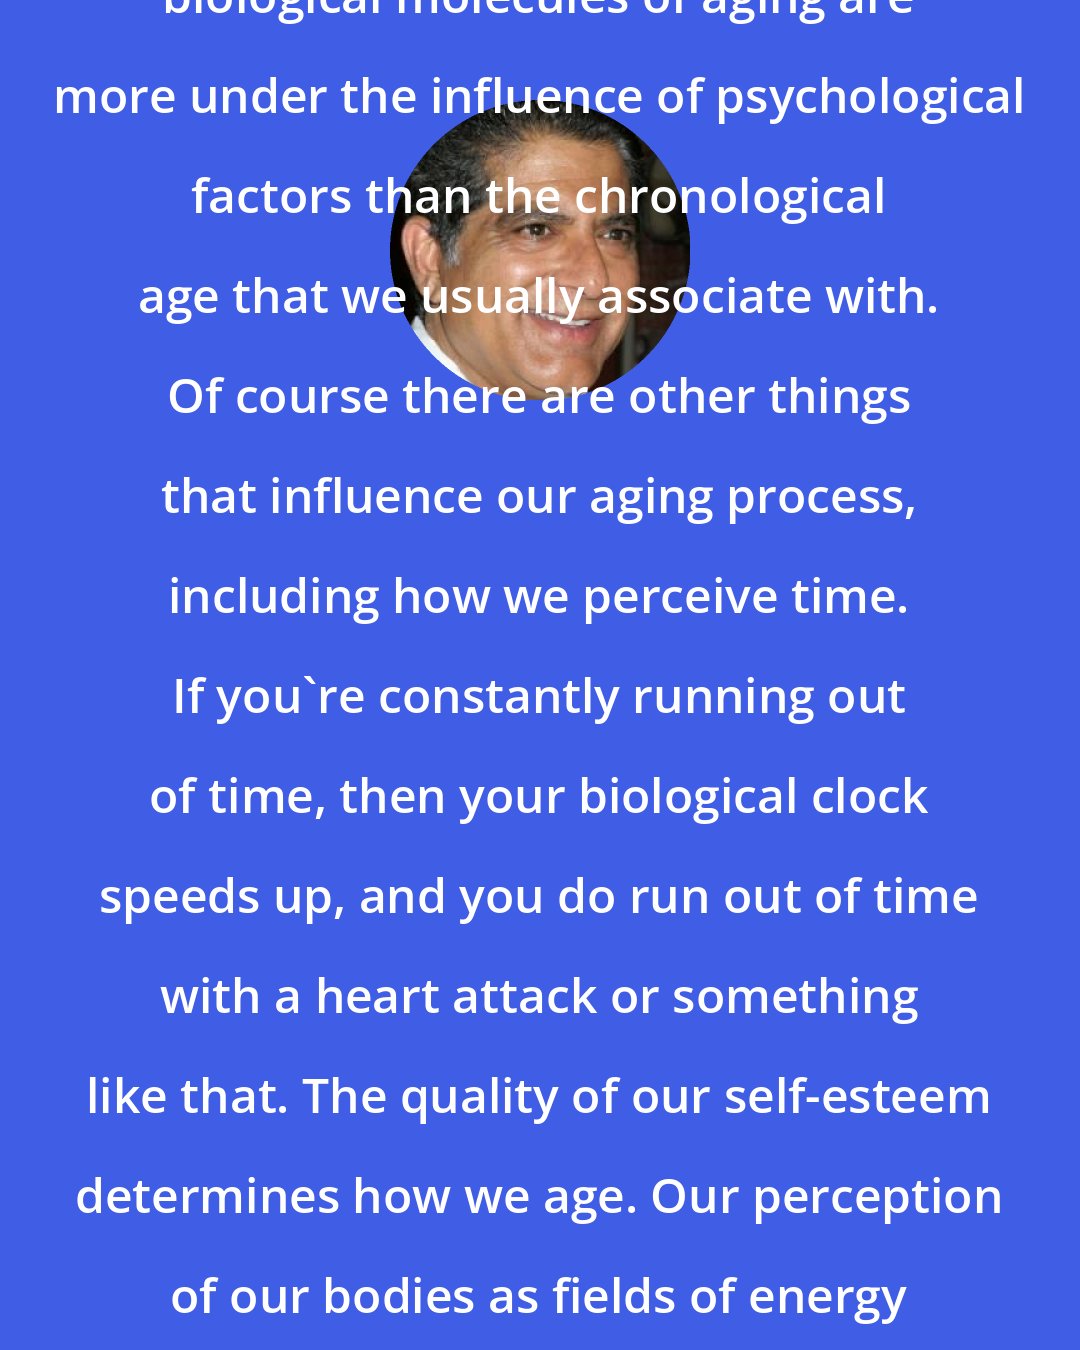 Deepak Chopra: There is more and more data that the biological molecules of aging are more under the influence of psychological factors than the chronological age that we usually associate with. Of course there are other things that influence our aging process, including how we perceive time. If you're constantly running out of time, then your biological clock speeds up, and you do run out of time with a heart attack or something like that. The quality of our self-esteem determines how we age. Our perception of our bodies as fields of energy or fields of matter influence how our body ages.